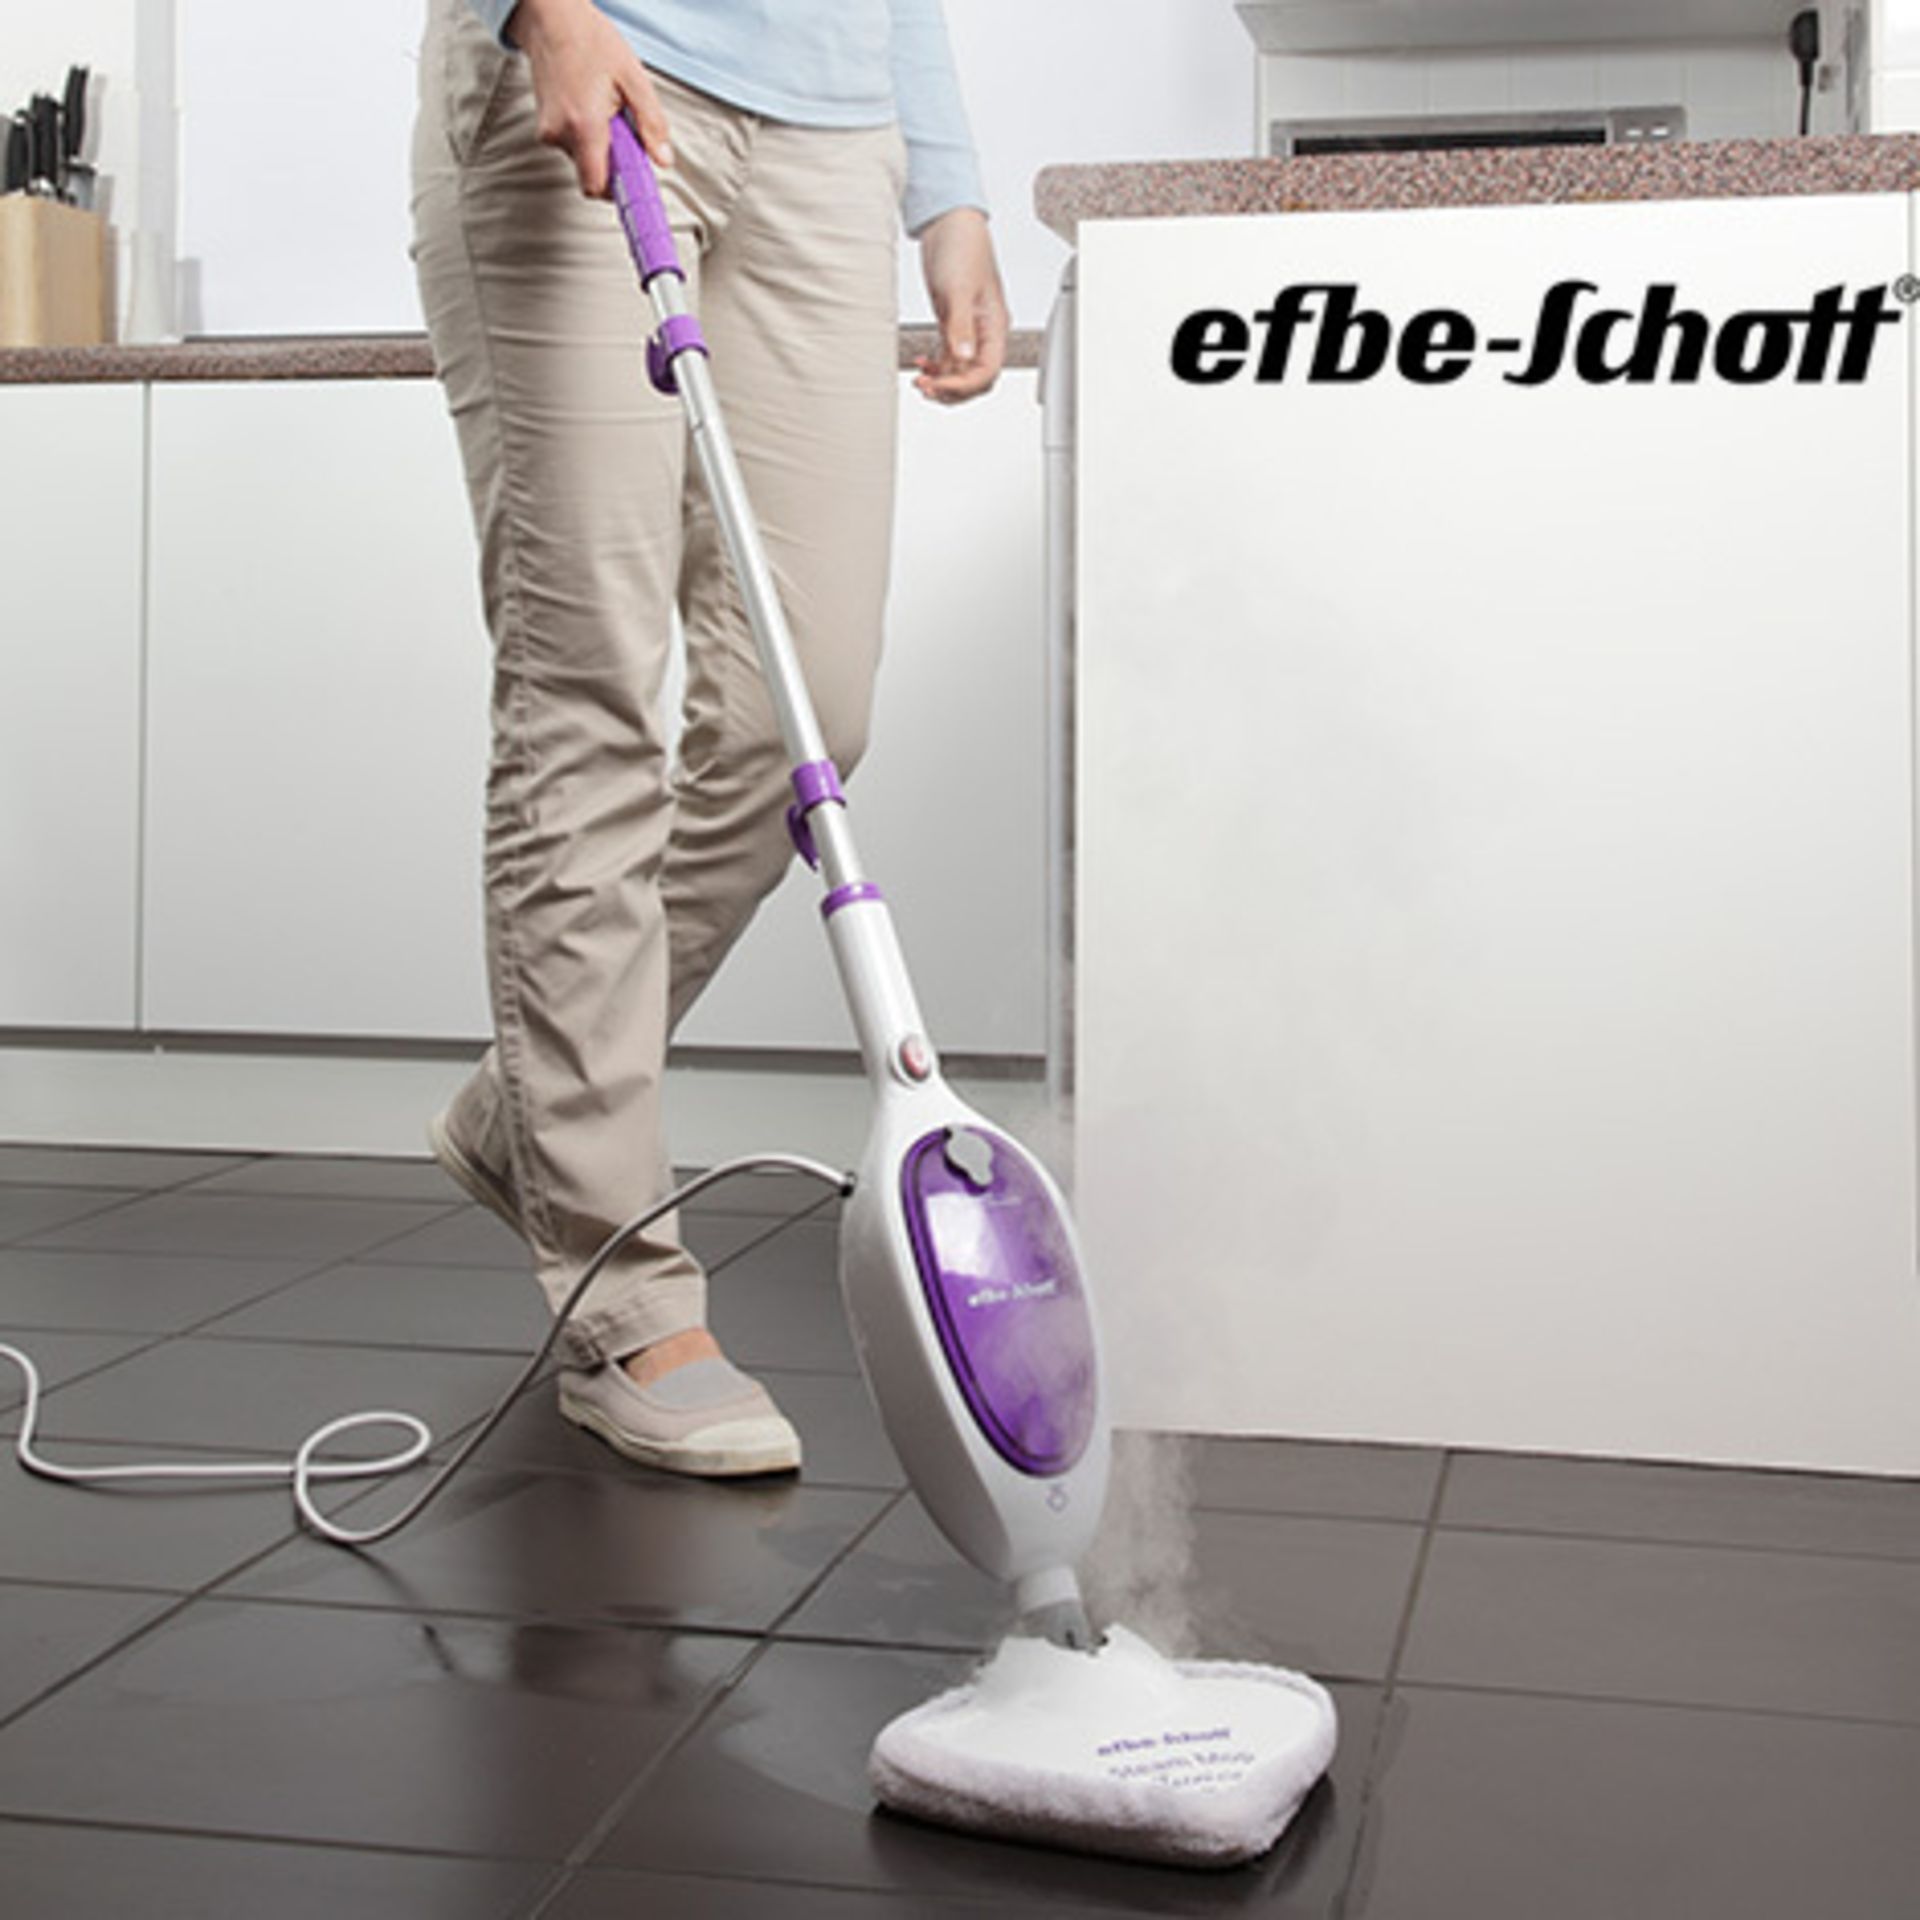 V Efbe-Schott Steam Mop (New And Boxed) Colours And Model May Vary RRP59.99